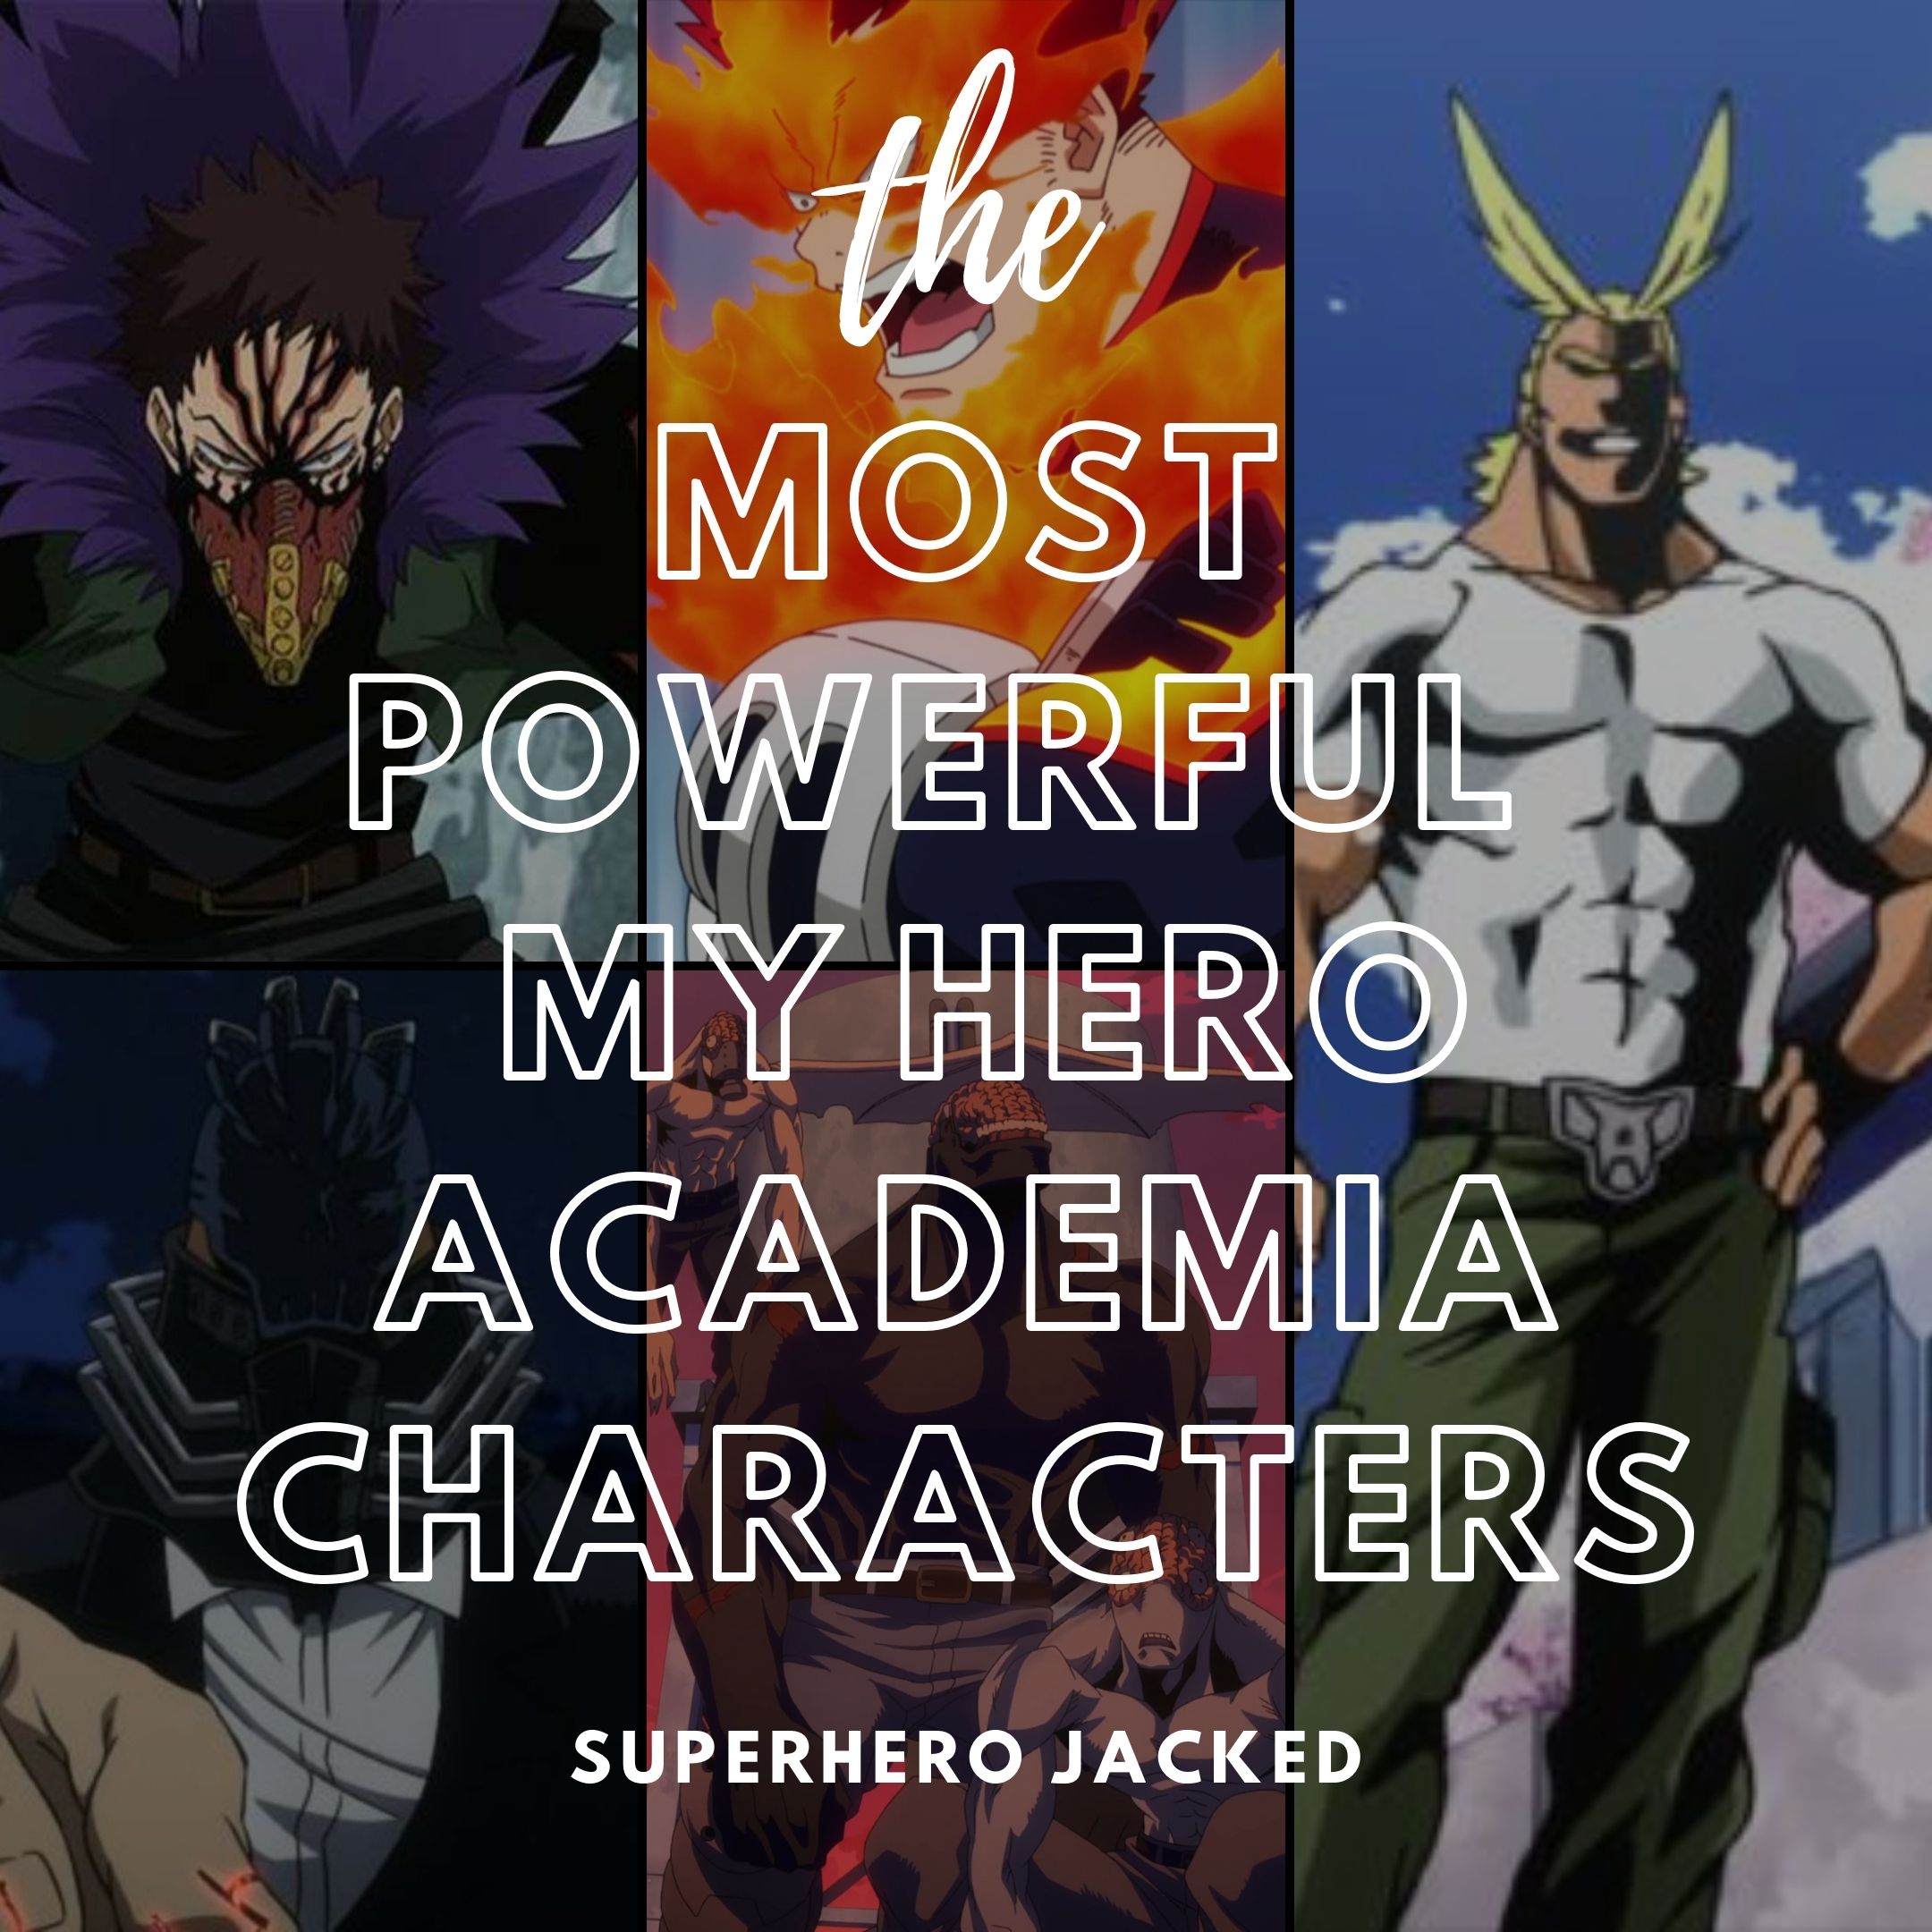 My Hero Academia: what you need to know about the biggest